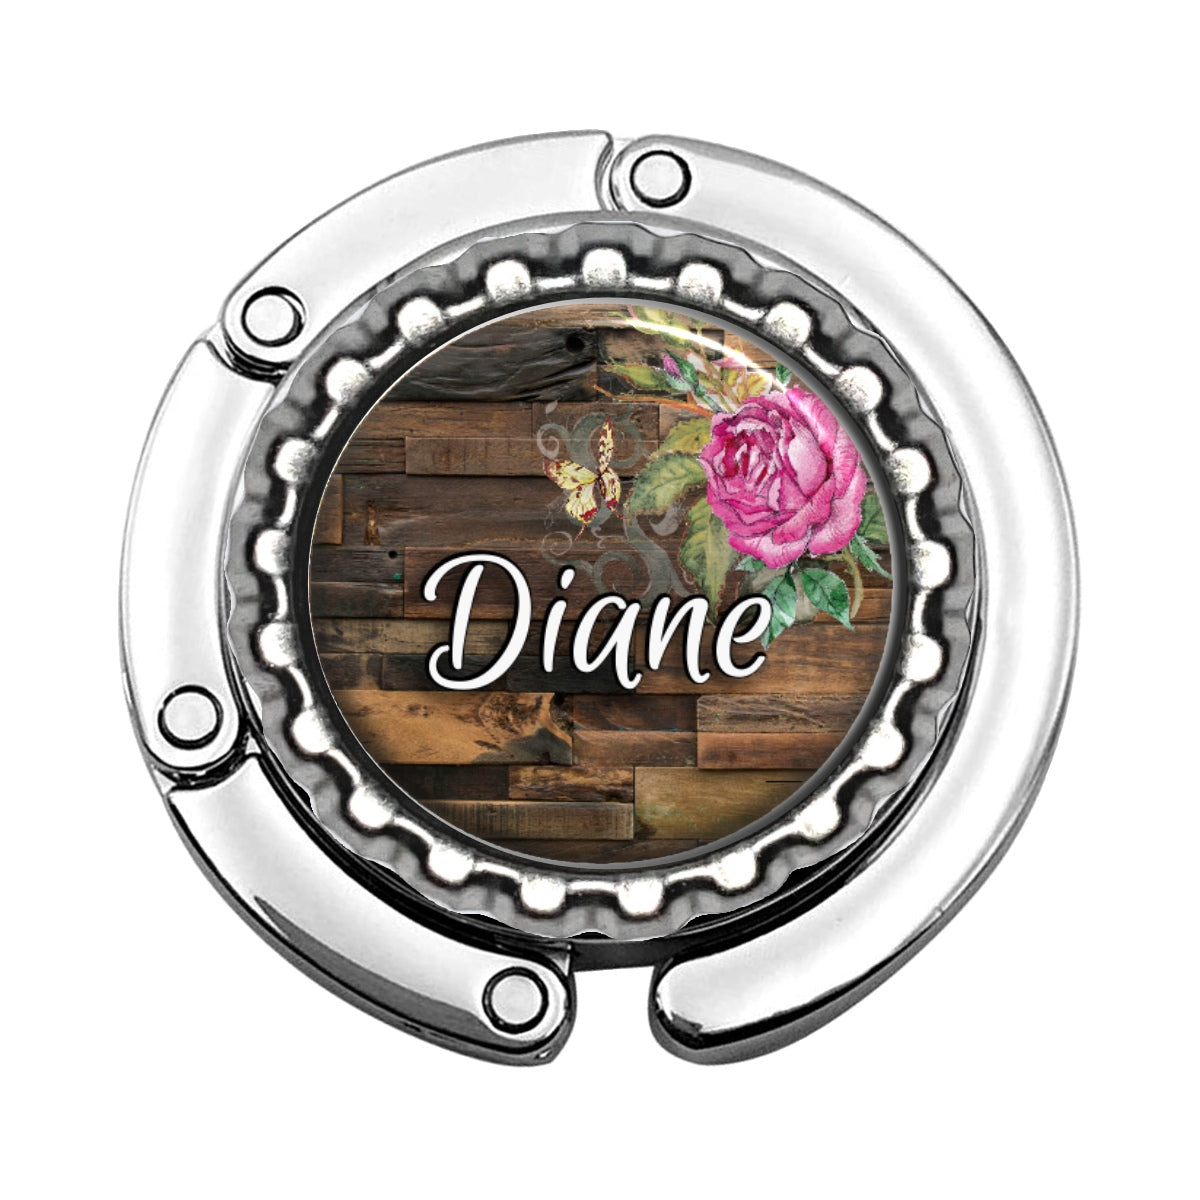 a bottle opener with a pink rose on it